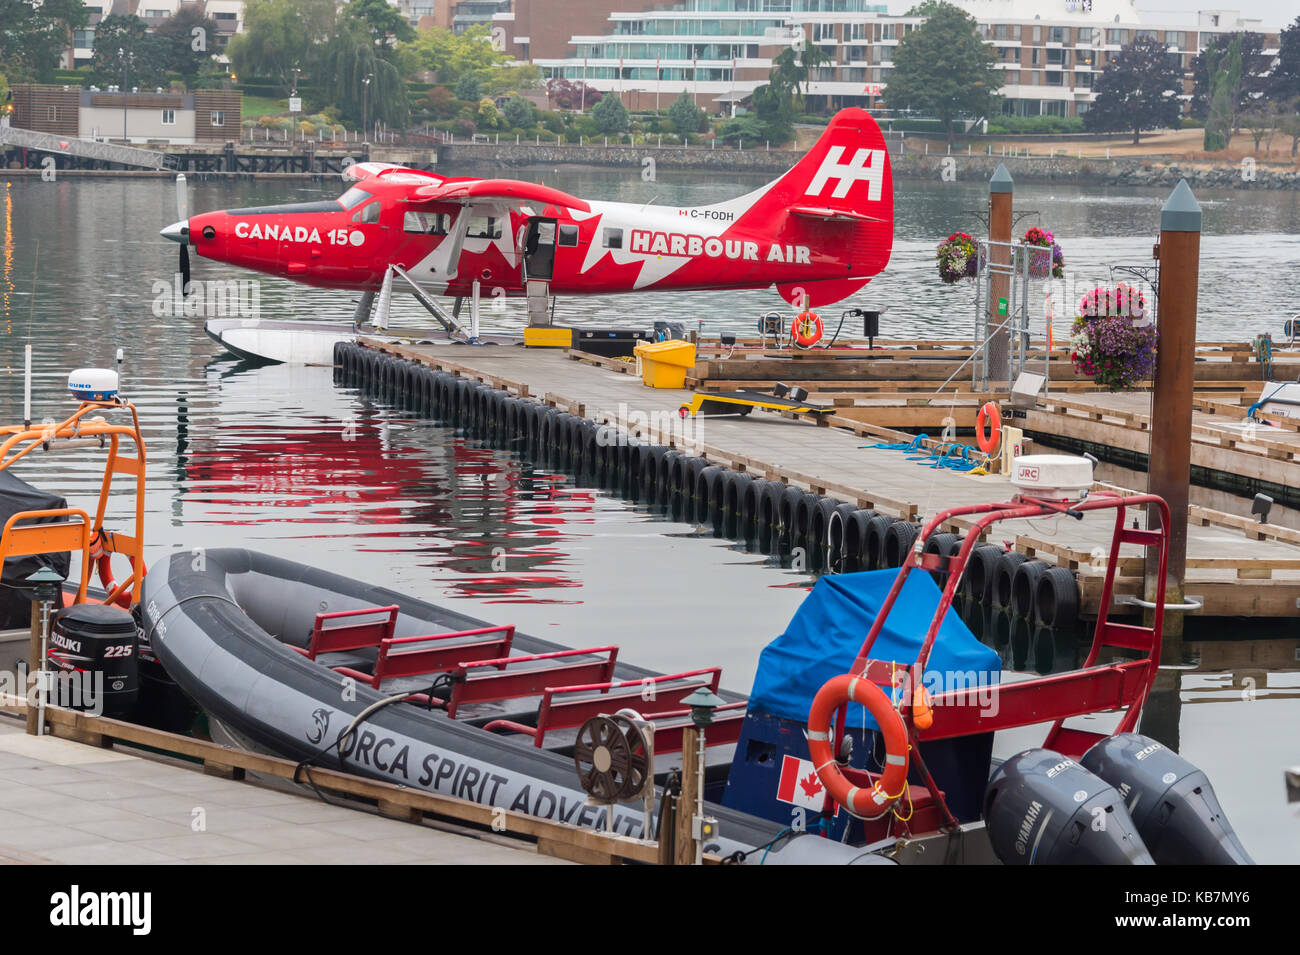 Victoria, British Columbia, Canada - 7 September 2017: Seaplane painted with the Canadian flag docked at Victoria Harbour Airport Stock Photo